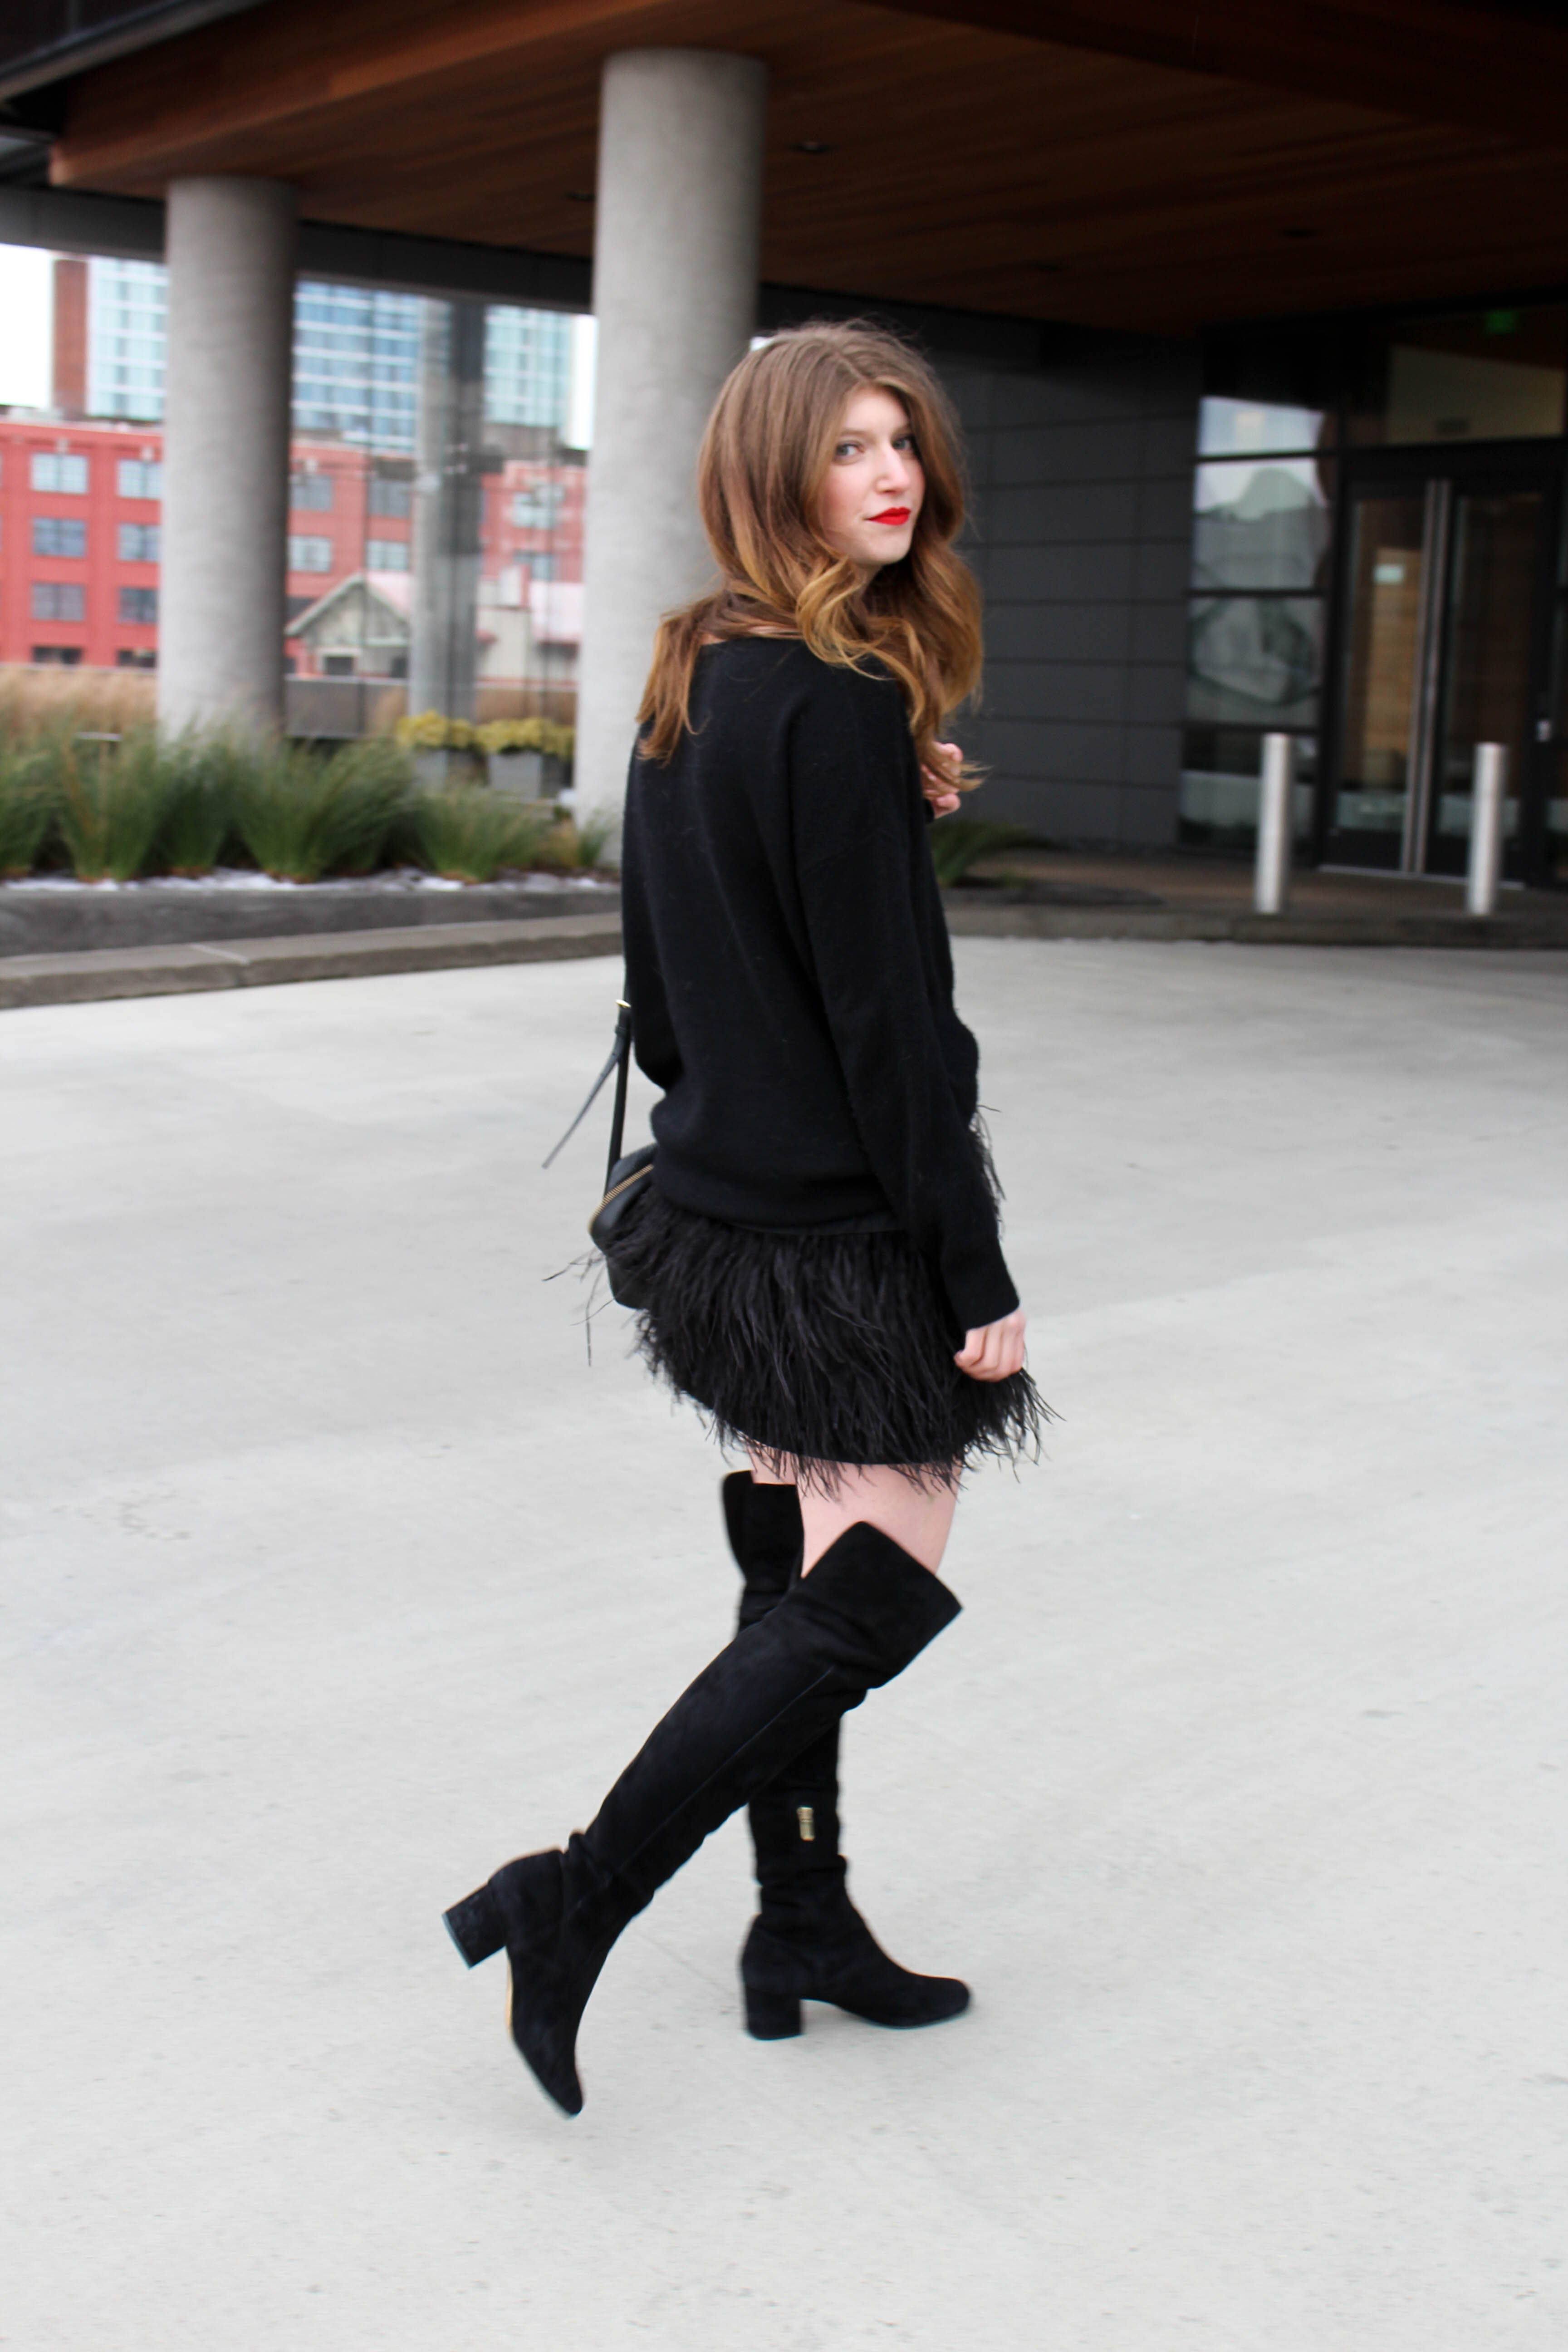 feather skirt - 360 cashmere - otk boots